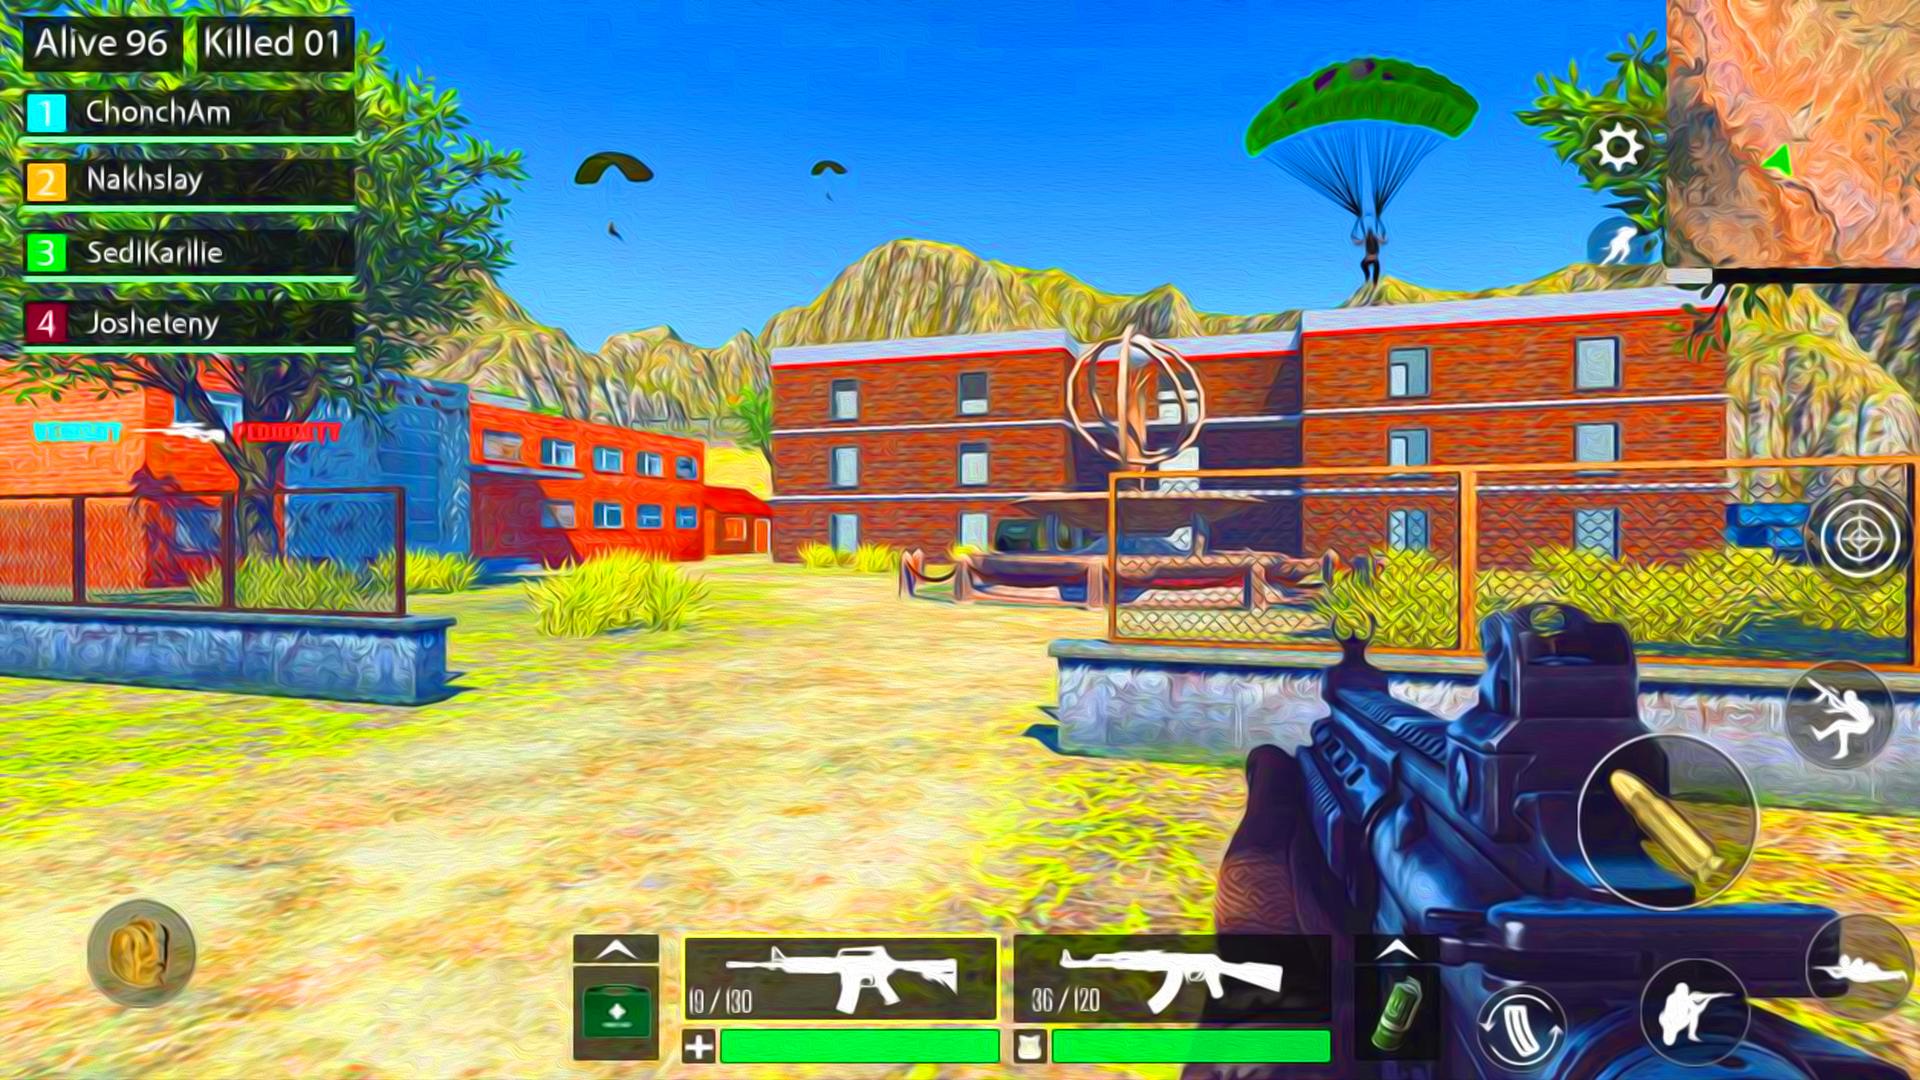 Survivalsquad Free Fire Critical Strike 2021 For Android Apk Download